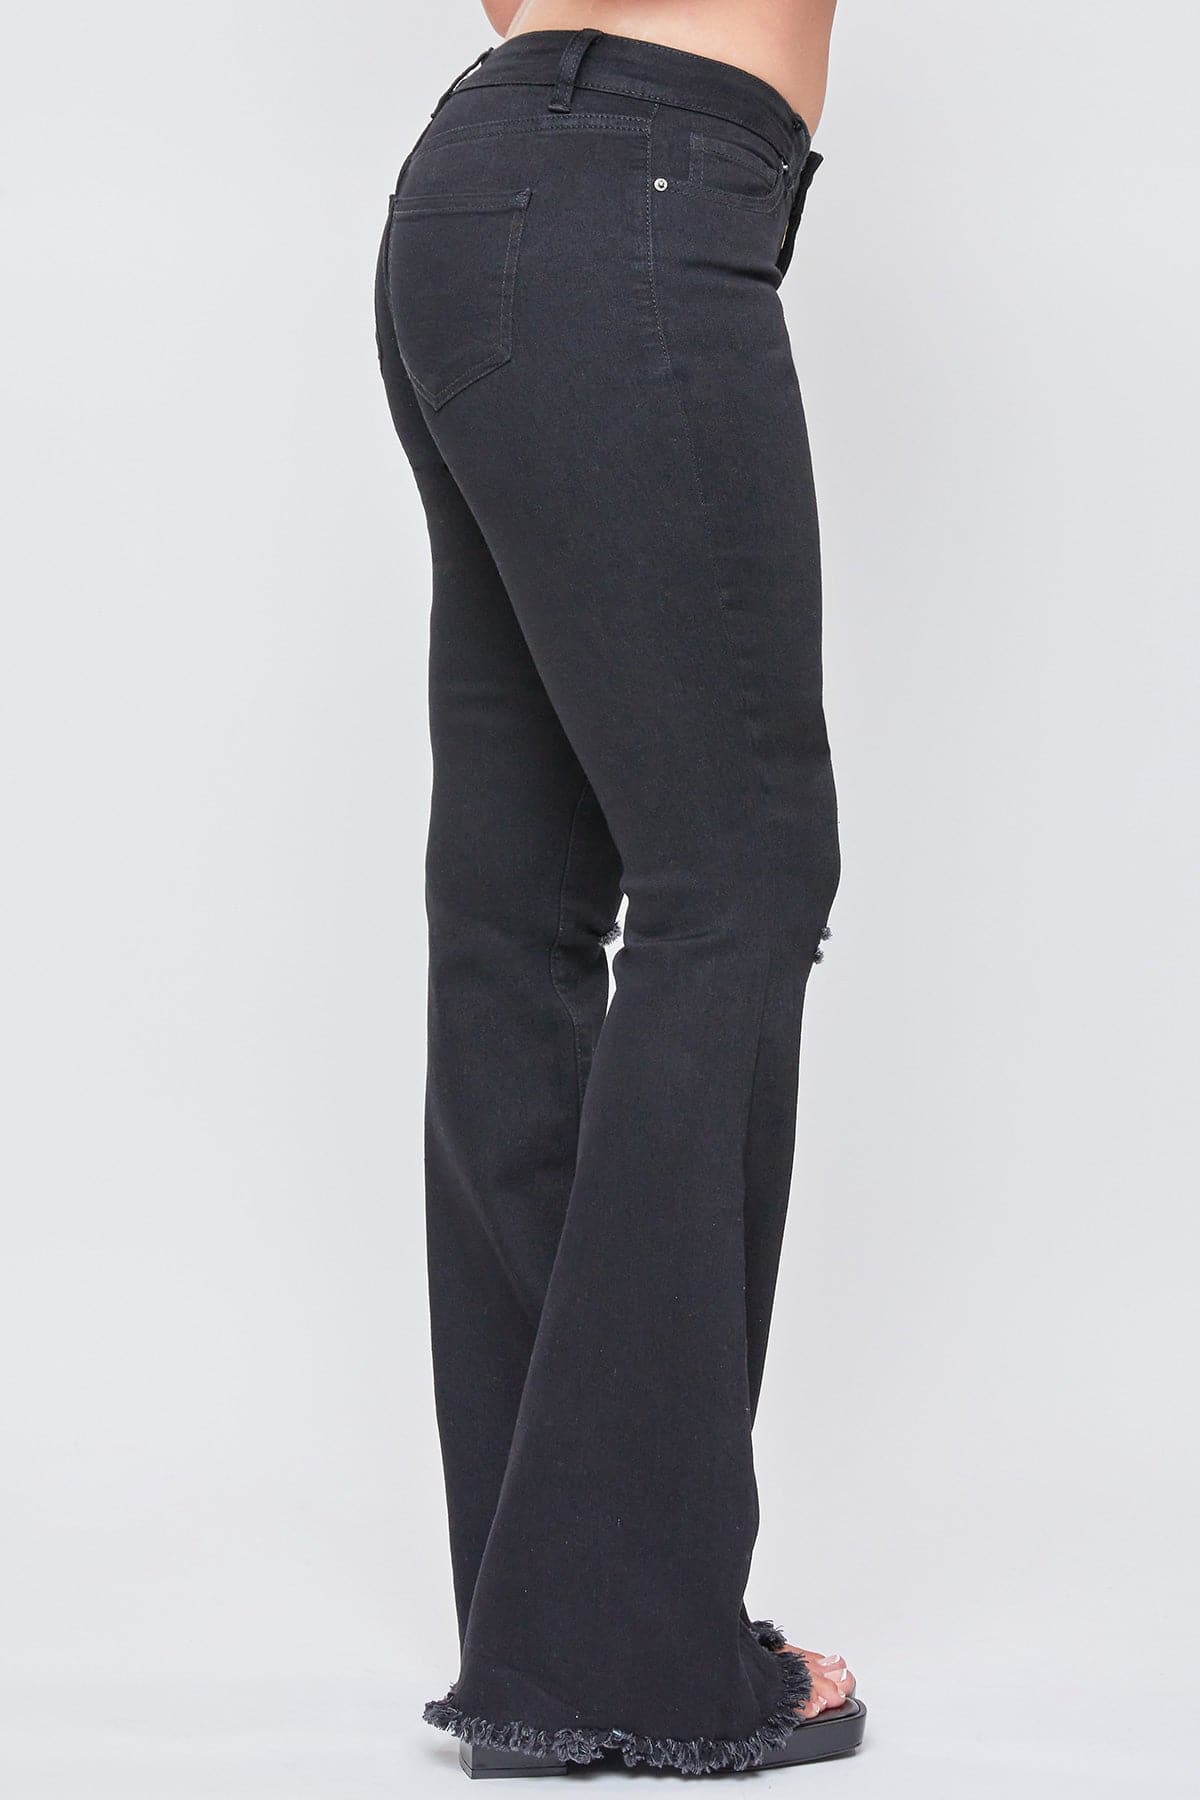 Women's Frayed Flare Jeans-Sale